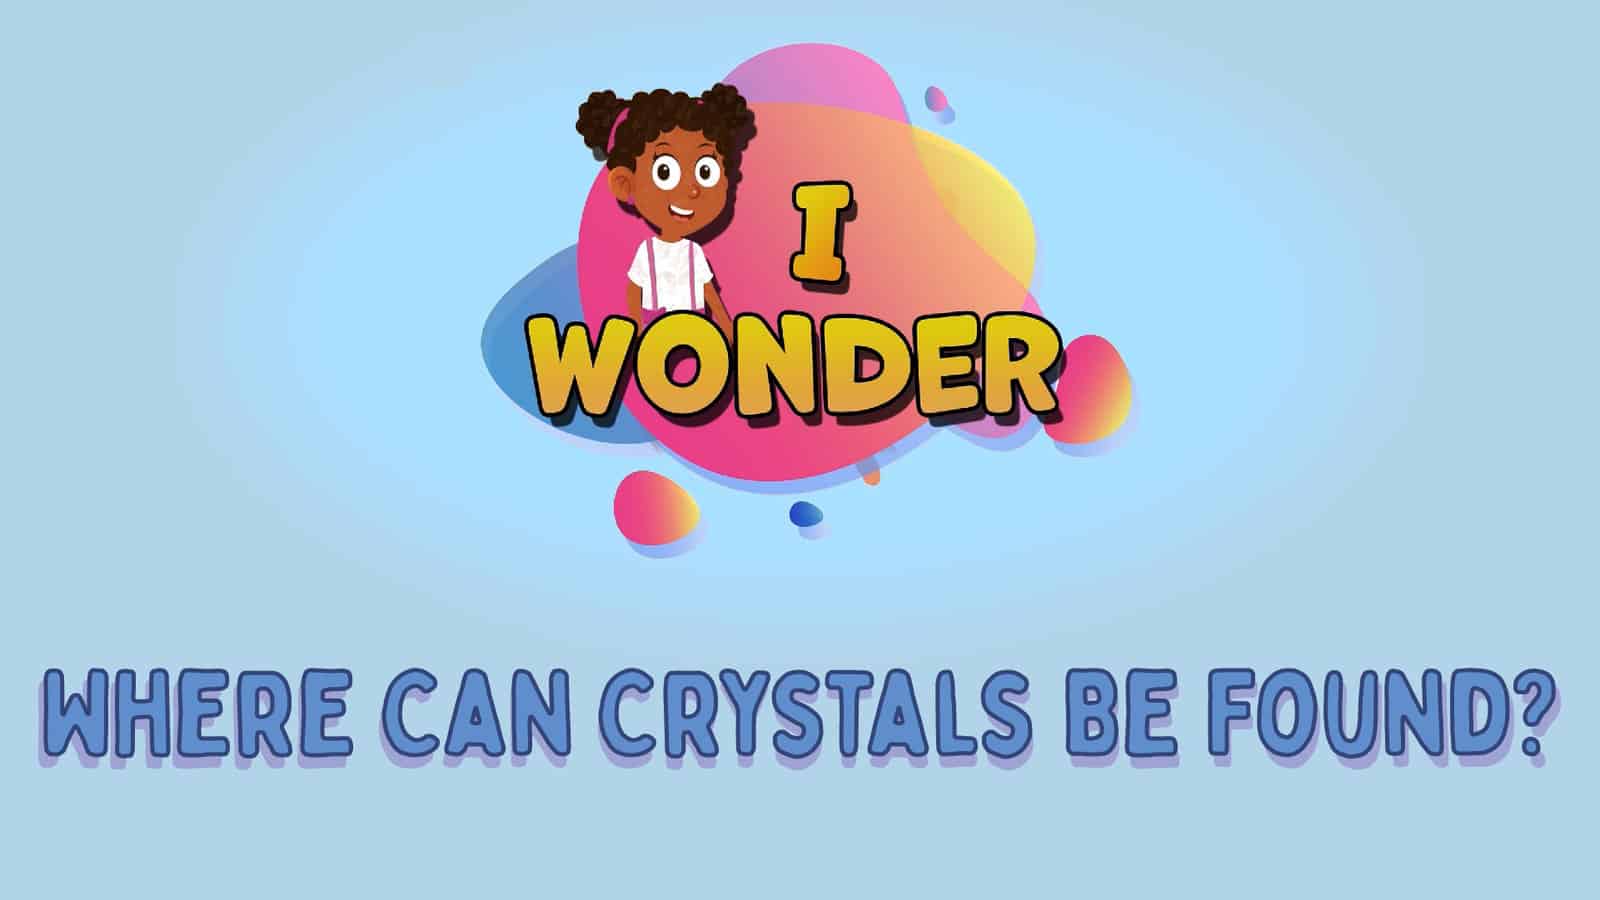 Where Can Crystals Be Found?